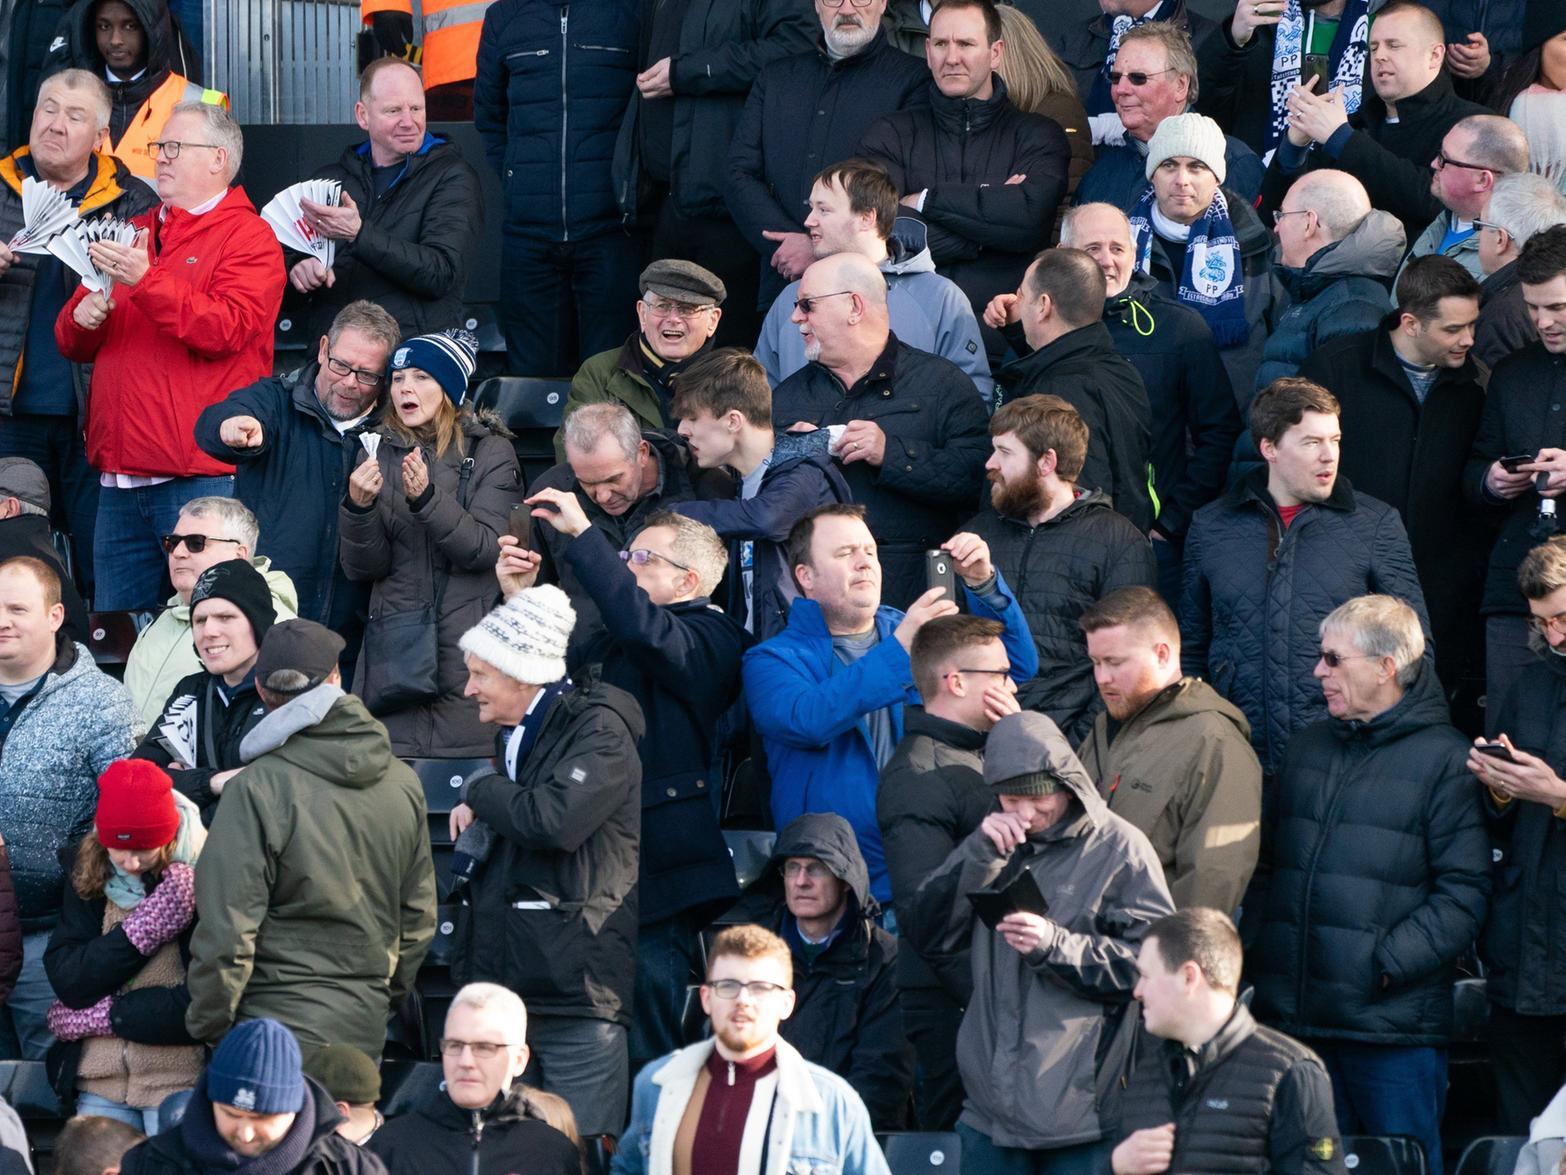 Fulham fans on the left hold their clappers while PNE fans needed no such help, as the away section begins.